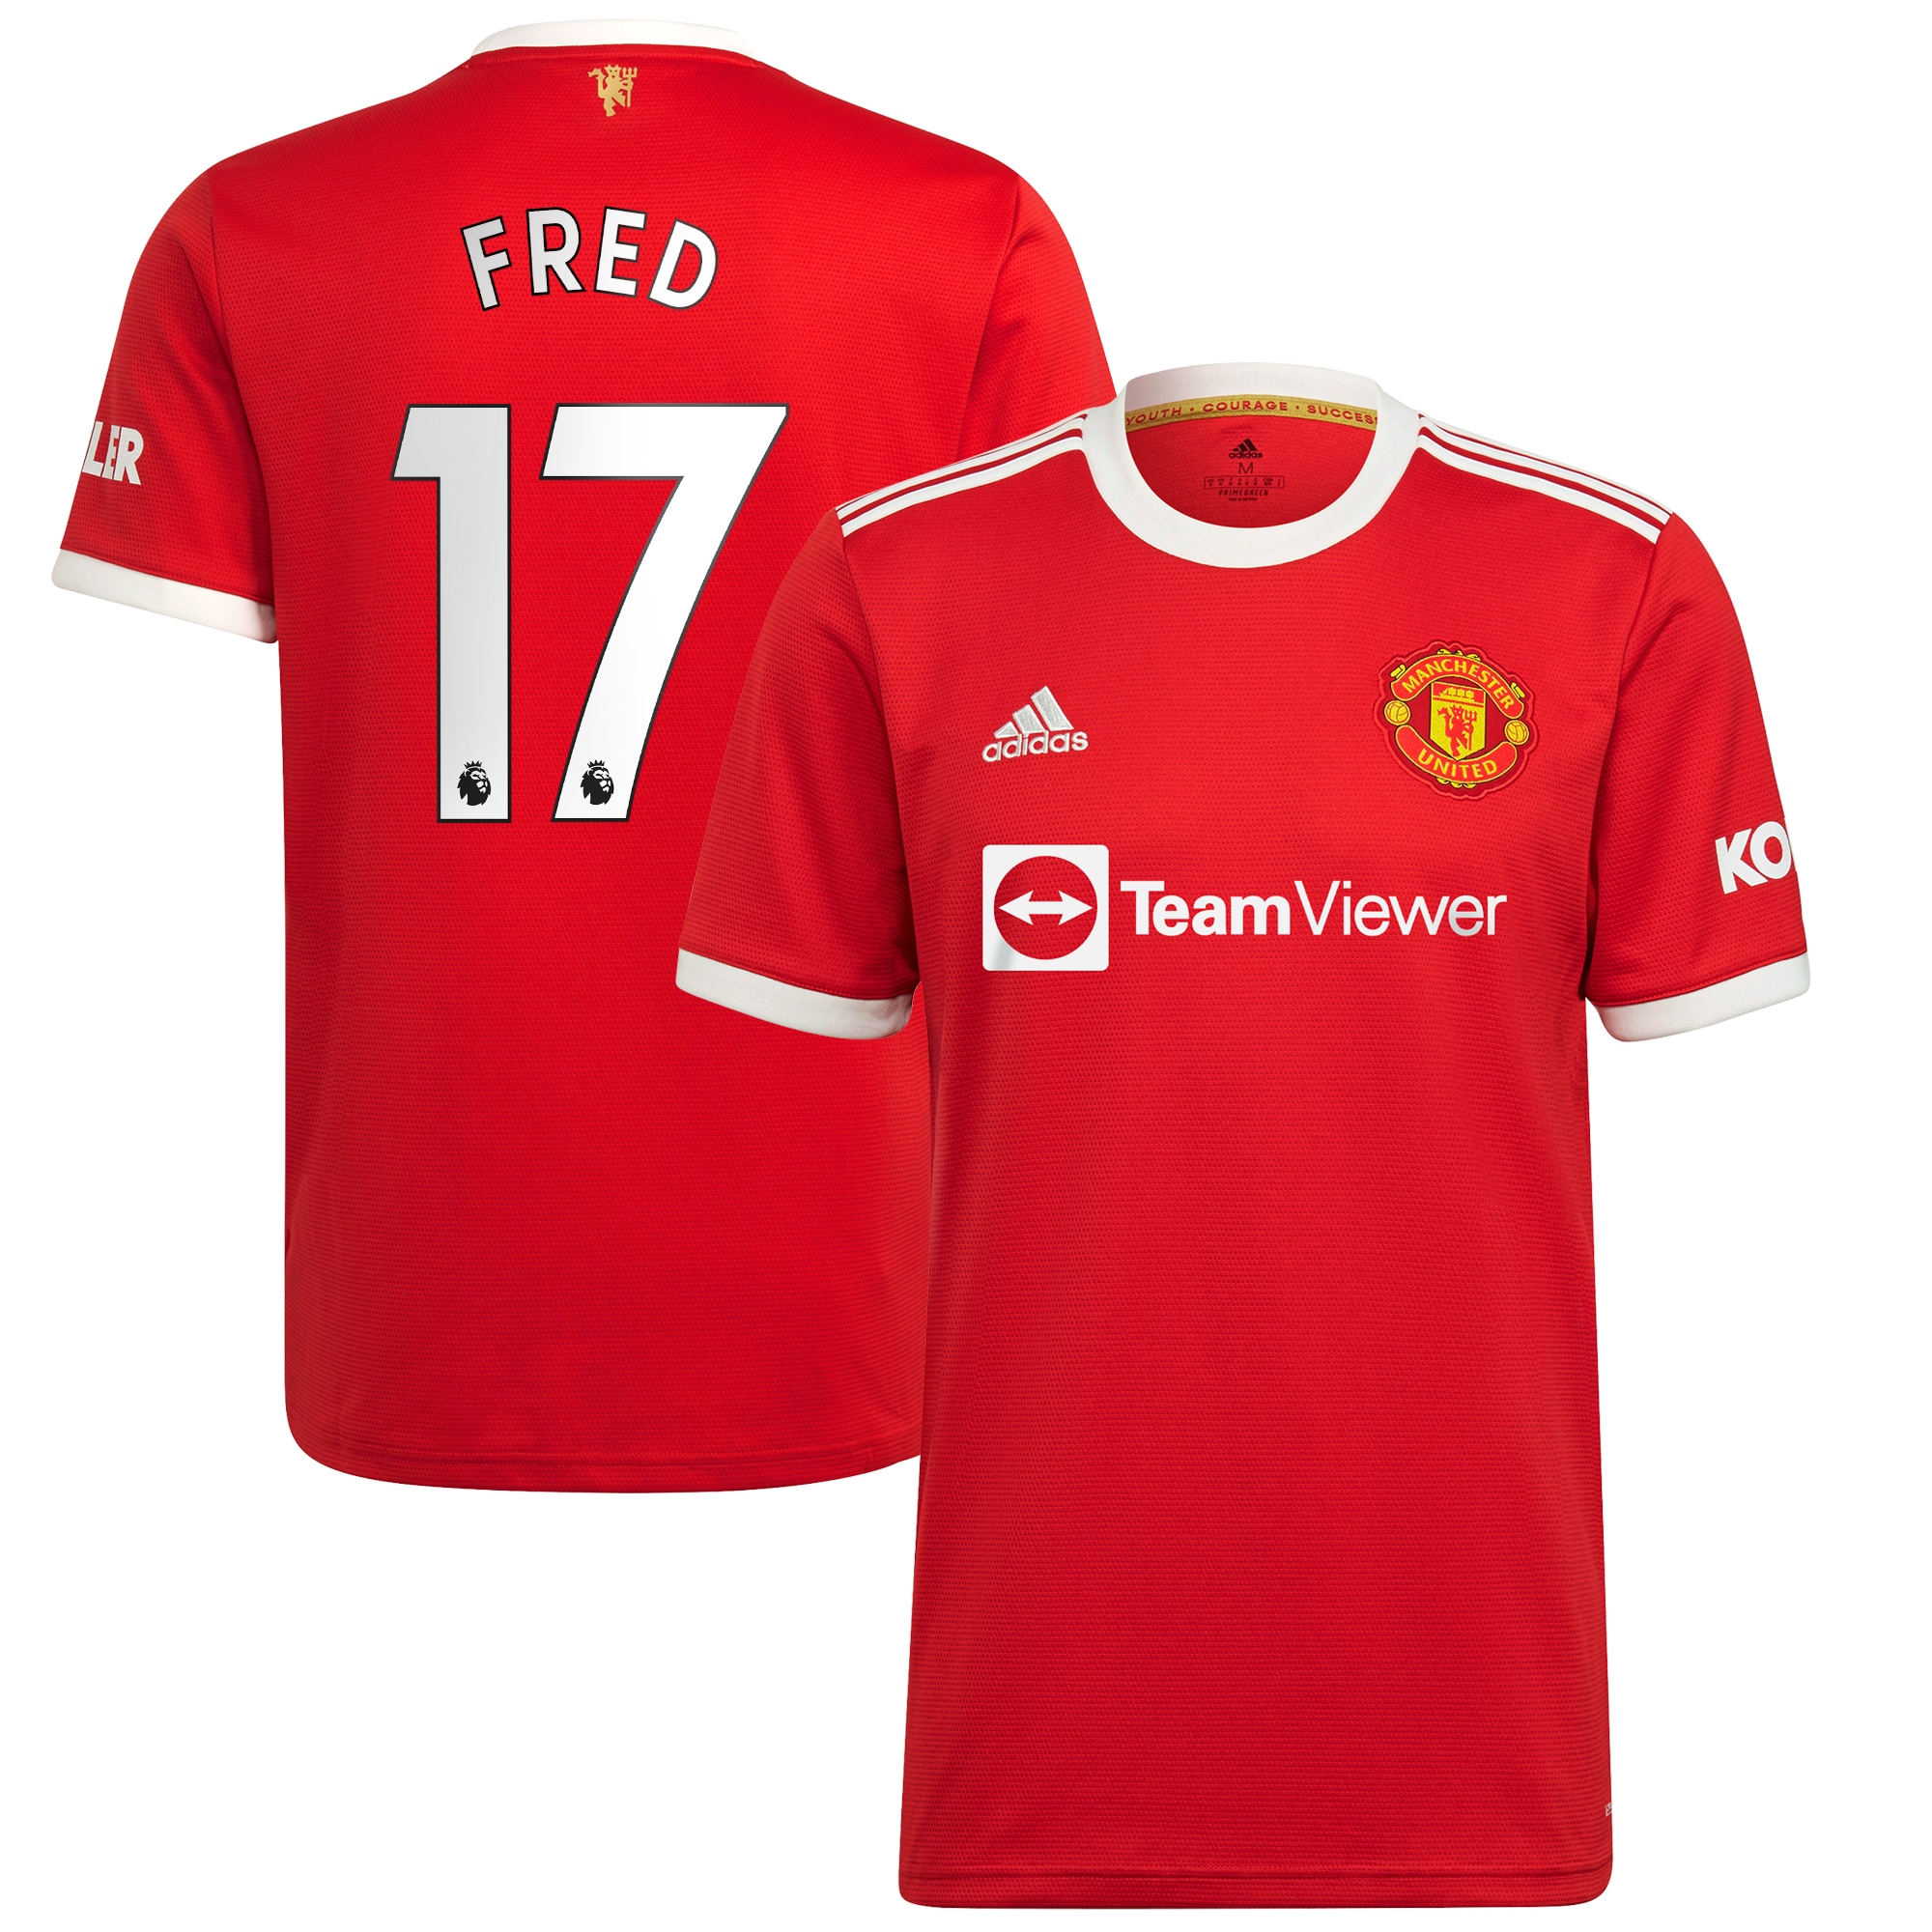 Men's Manchester United Jerseys Red Fred 2021/22 Home Printed Player Style